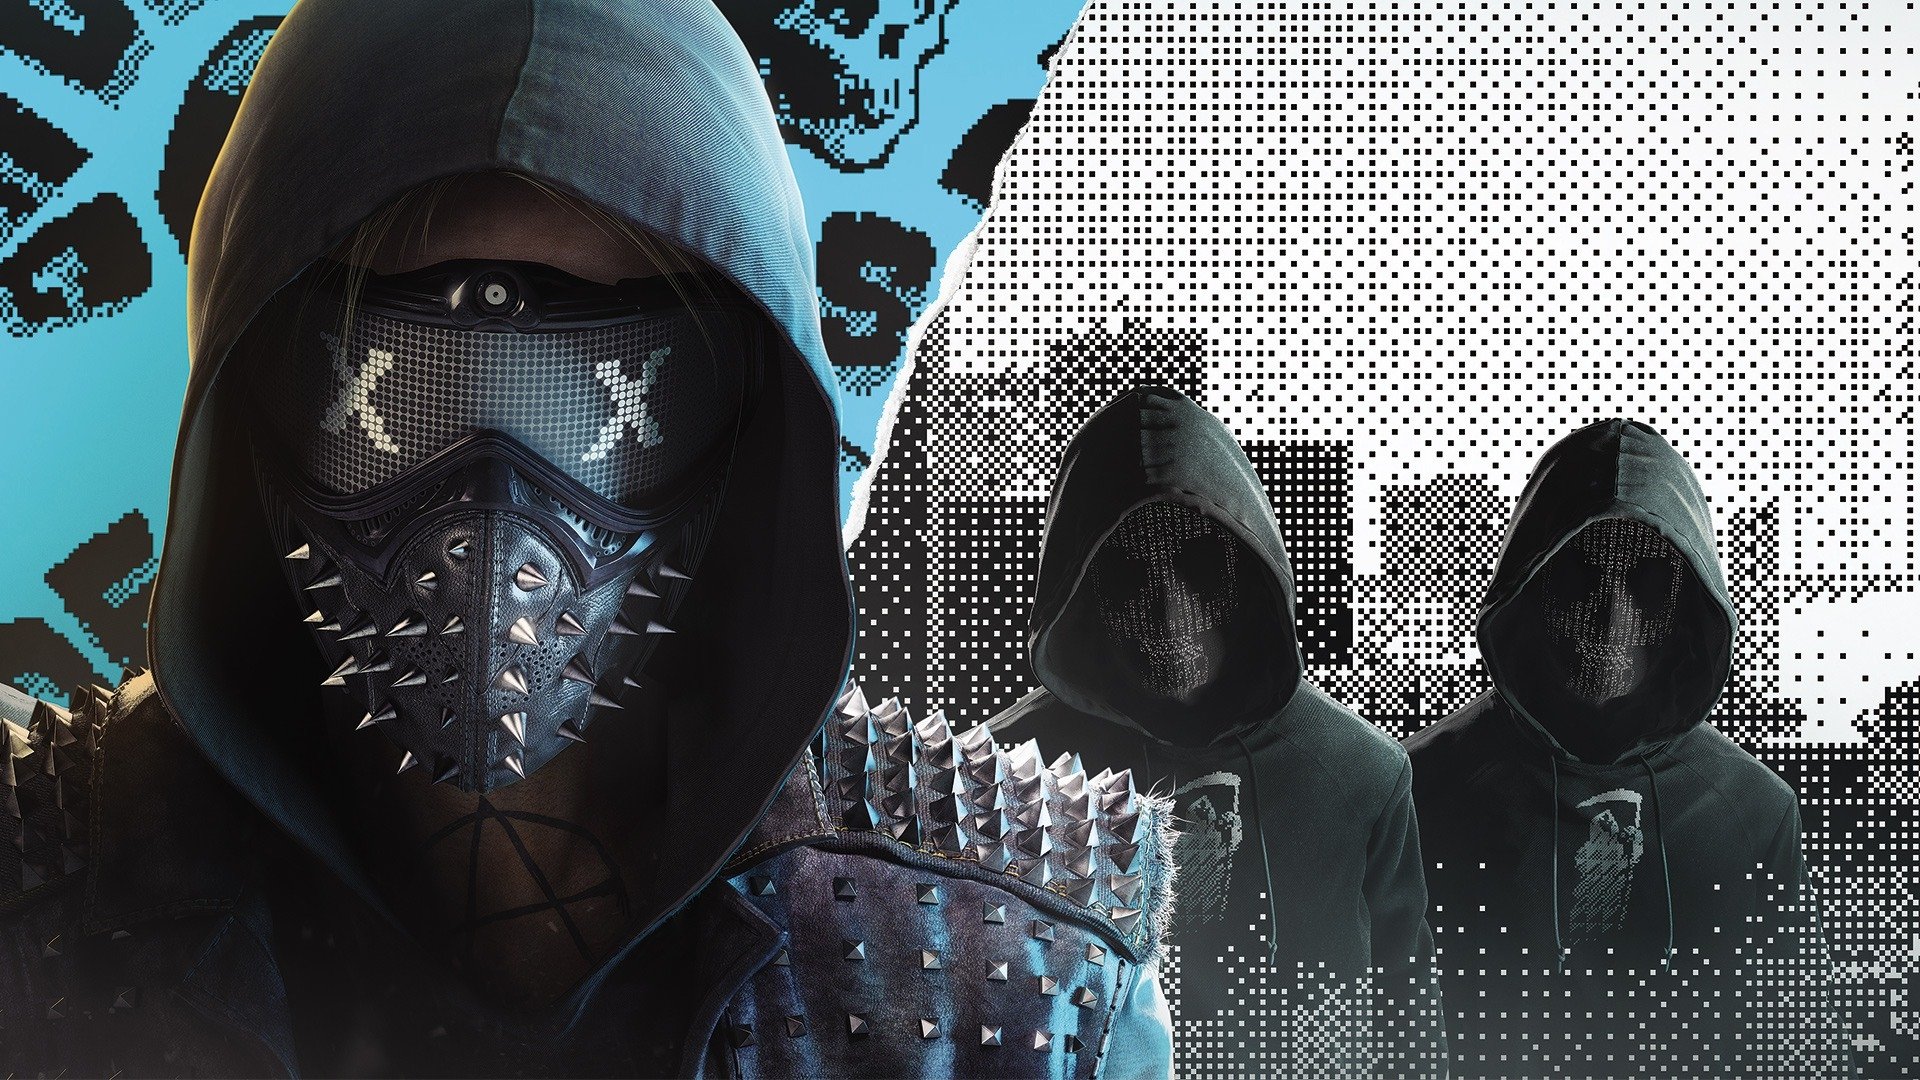 how to download watch dogs 2 free pc from ocean of games